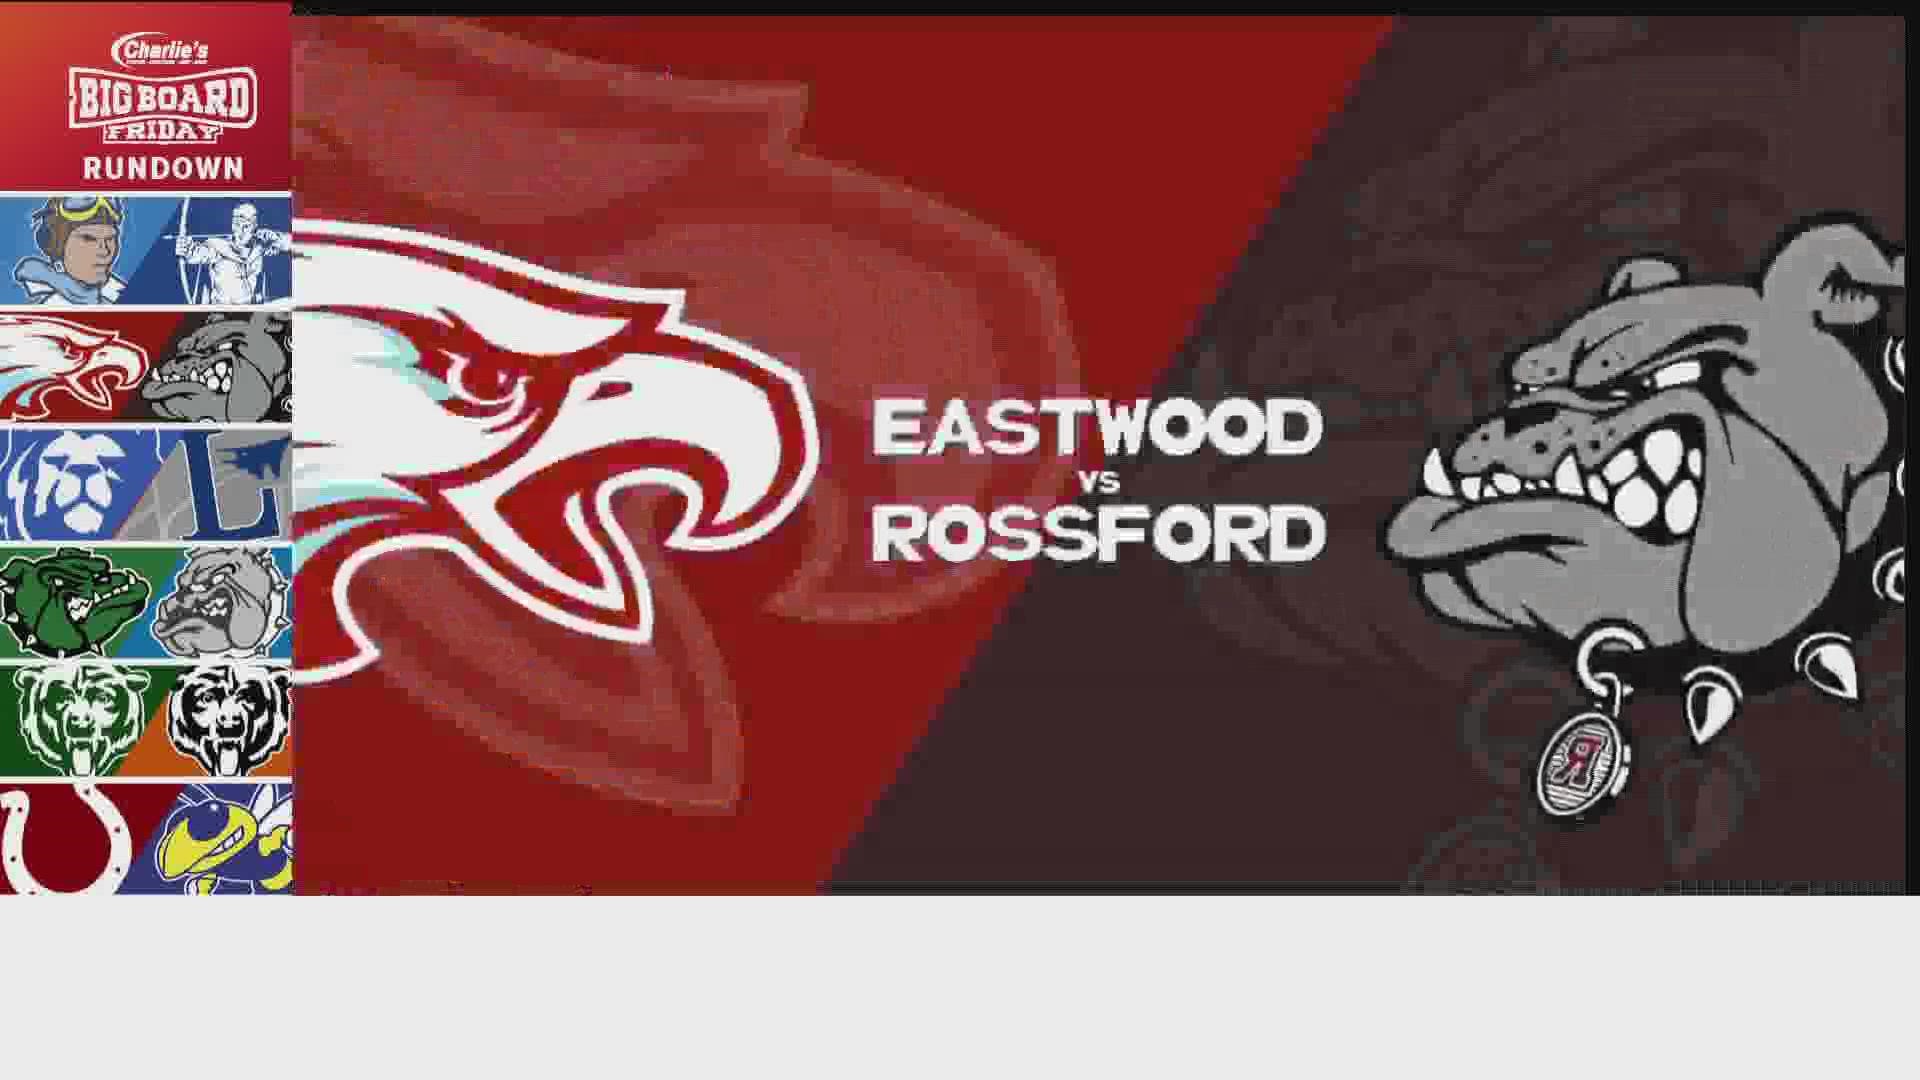 eastwood wins a wild one...58 to 41 the final...